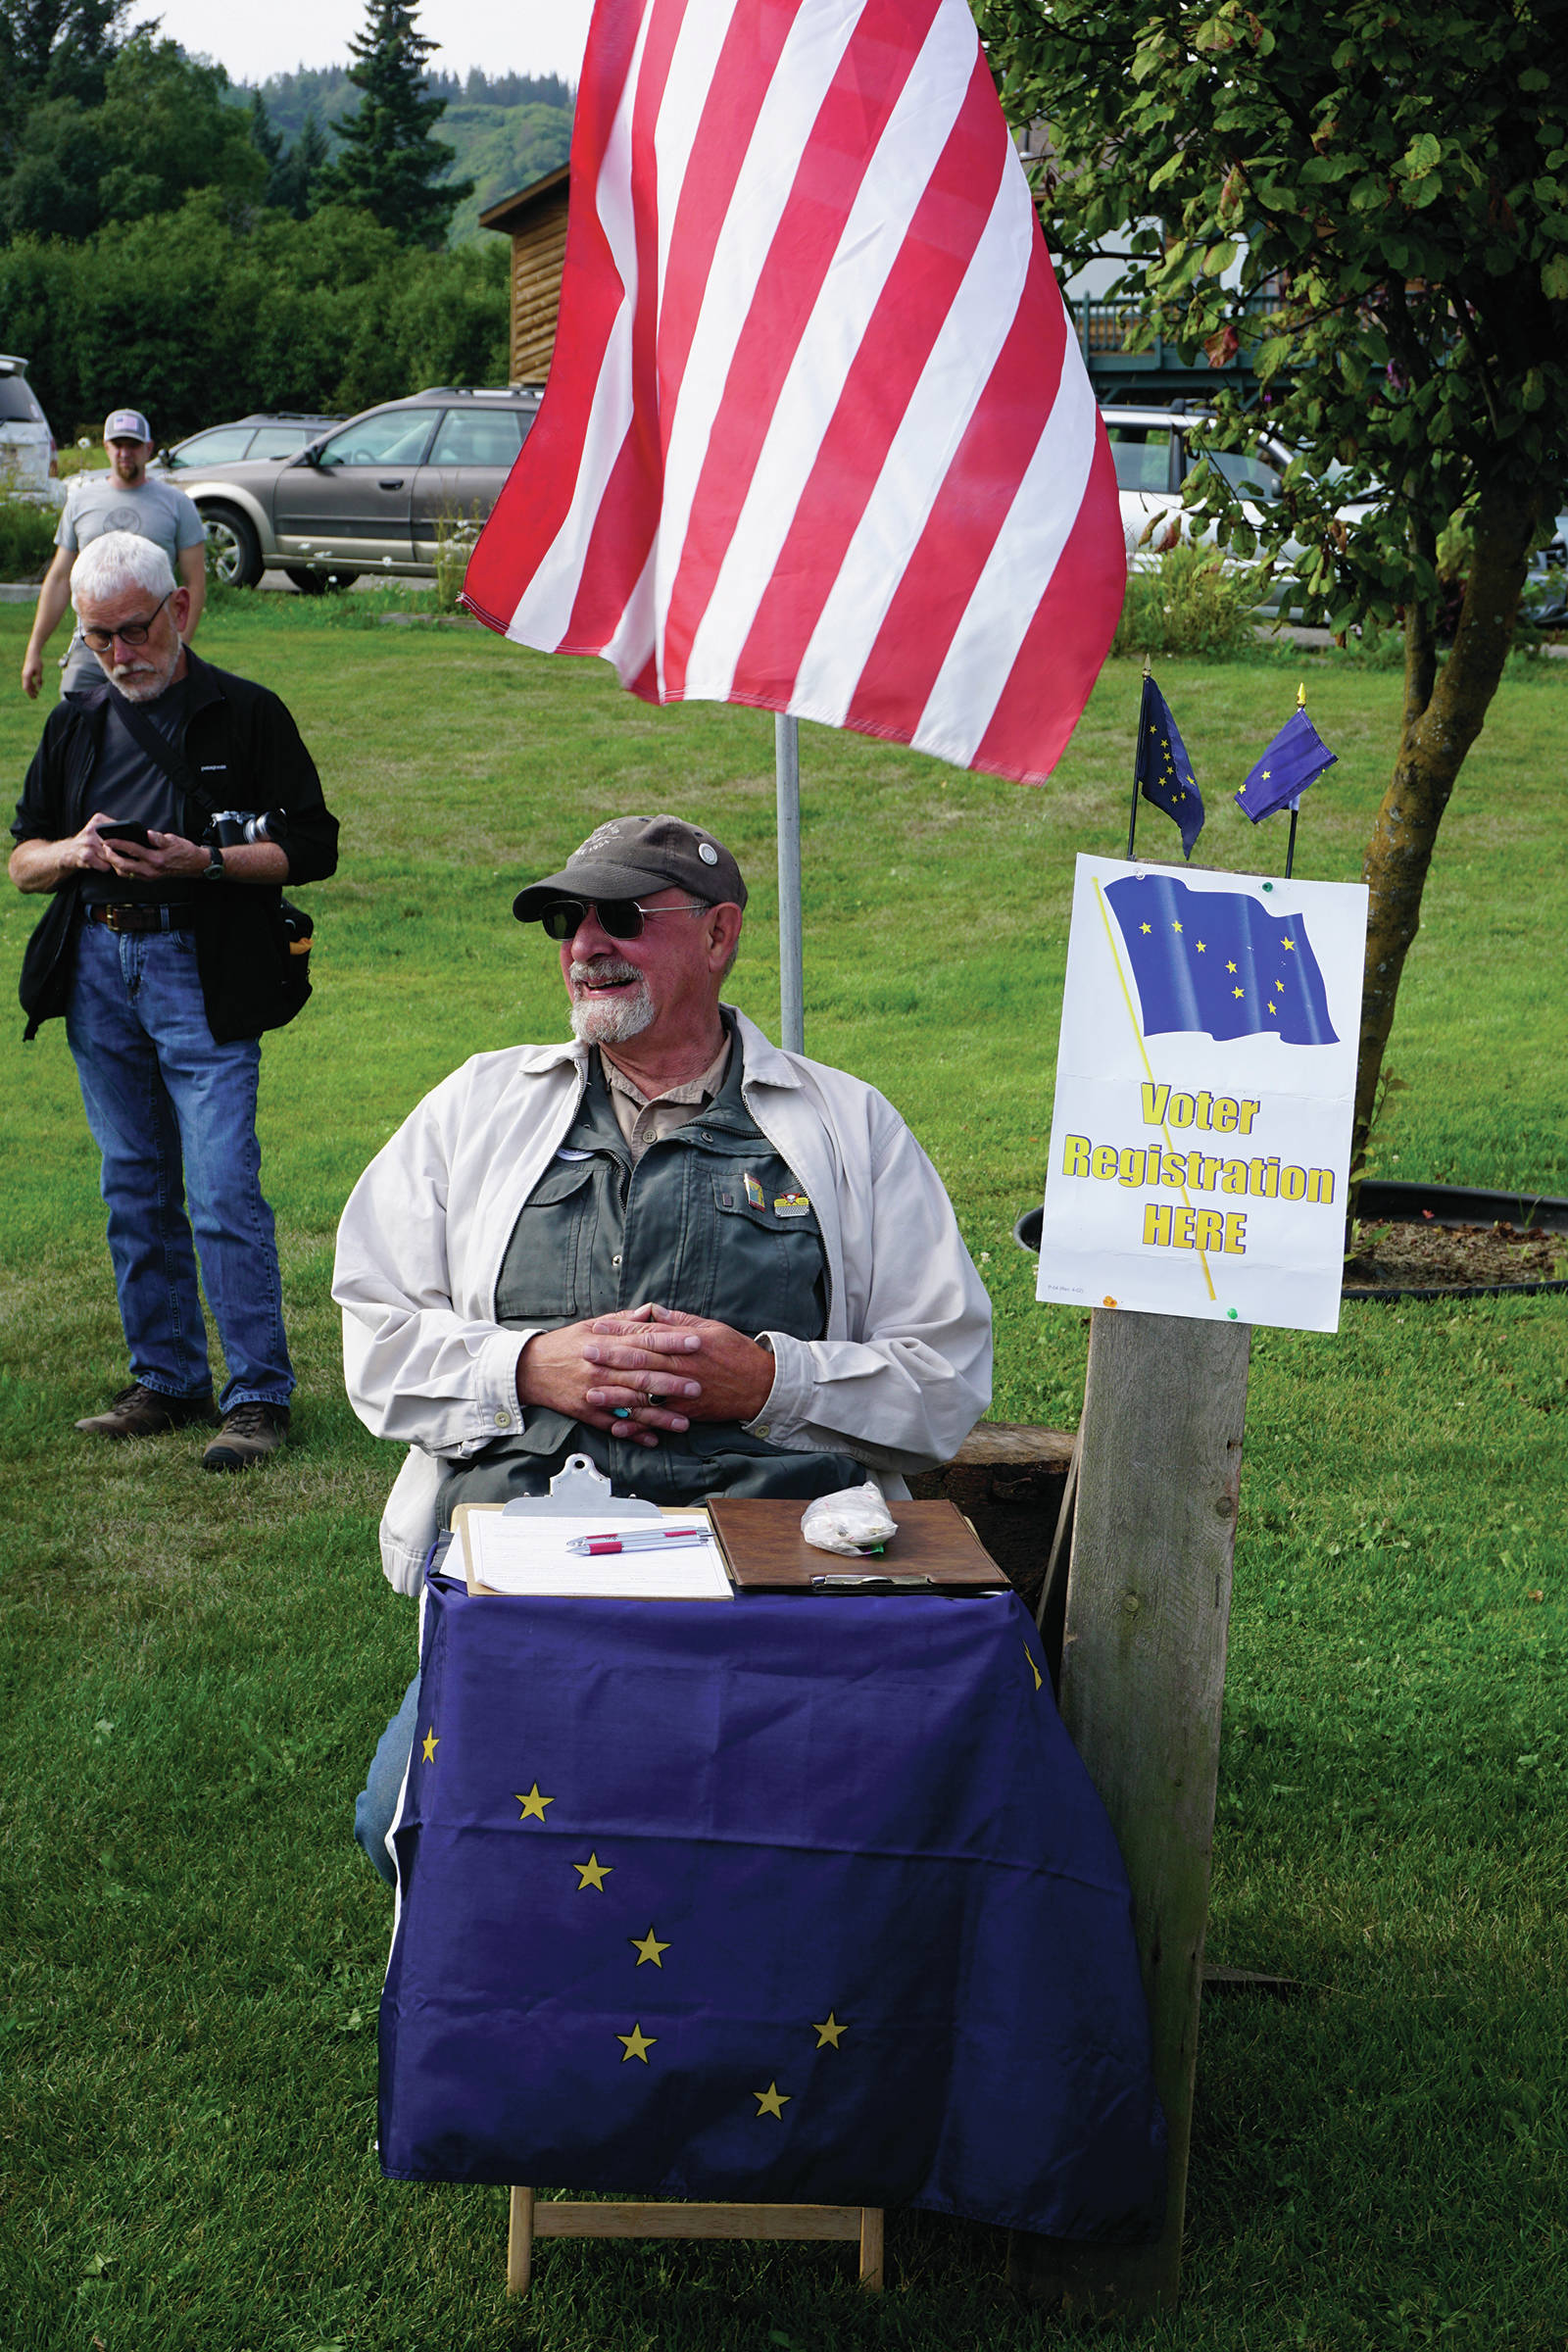 Ken Landfield staffs a voting registration table at a Recall Dunleavy rally held on Aug. 1, 2019, at WKFL Park in Homer, Alaska. Only registered Alaska voters could sign the recall petition. (Photo by Michael Armstrong)